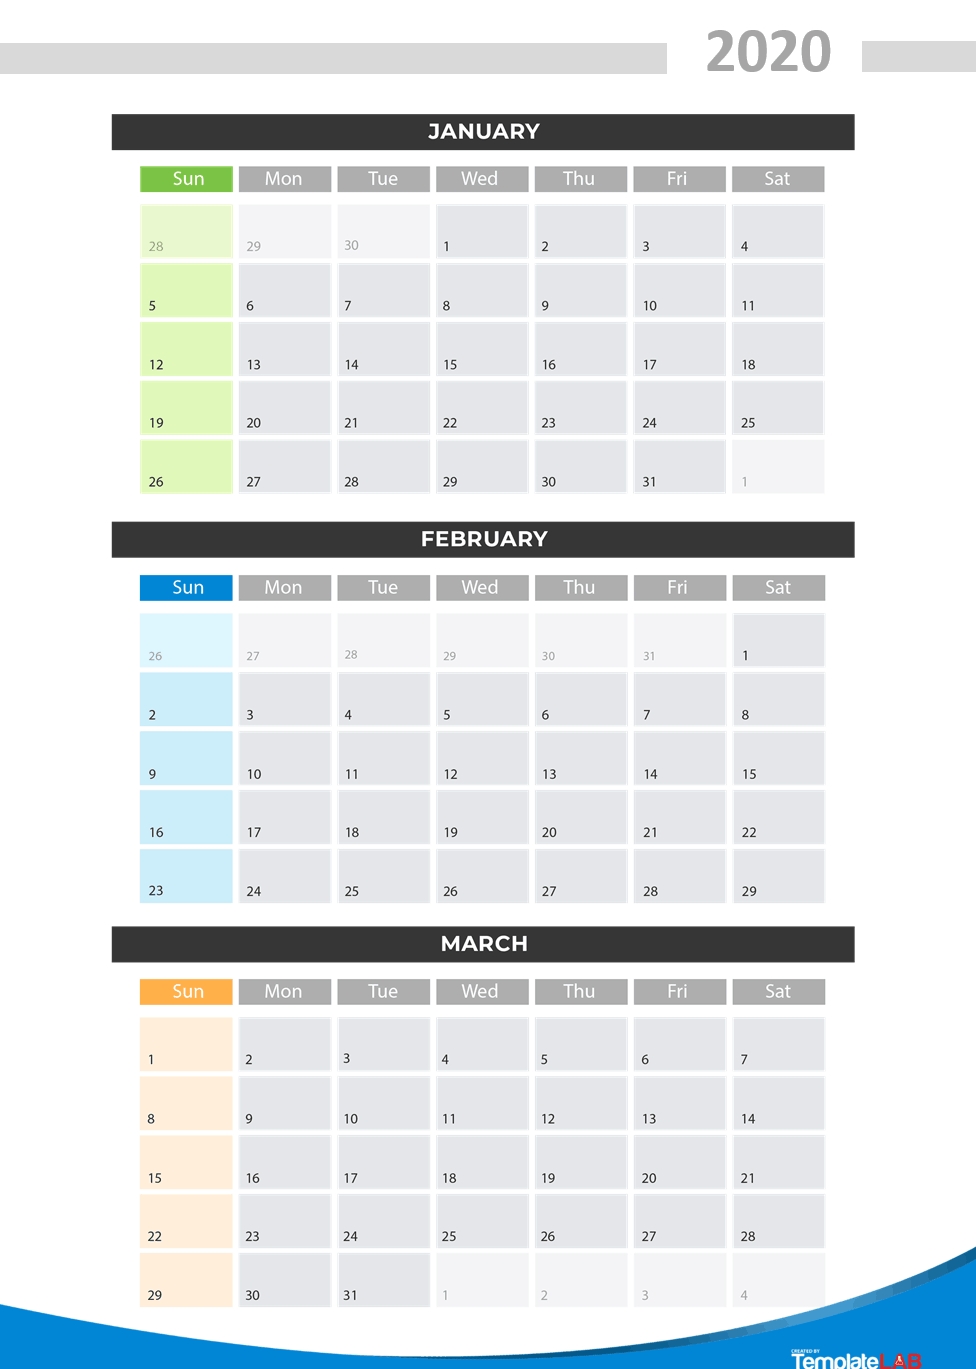 2020 Printable Calendars [Monthly, With Holidays, Yearly] ᐅ-Blank Quarterly Calendar Printable 2020